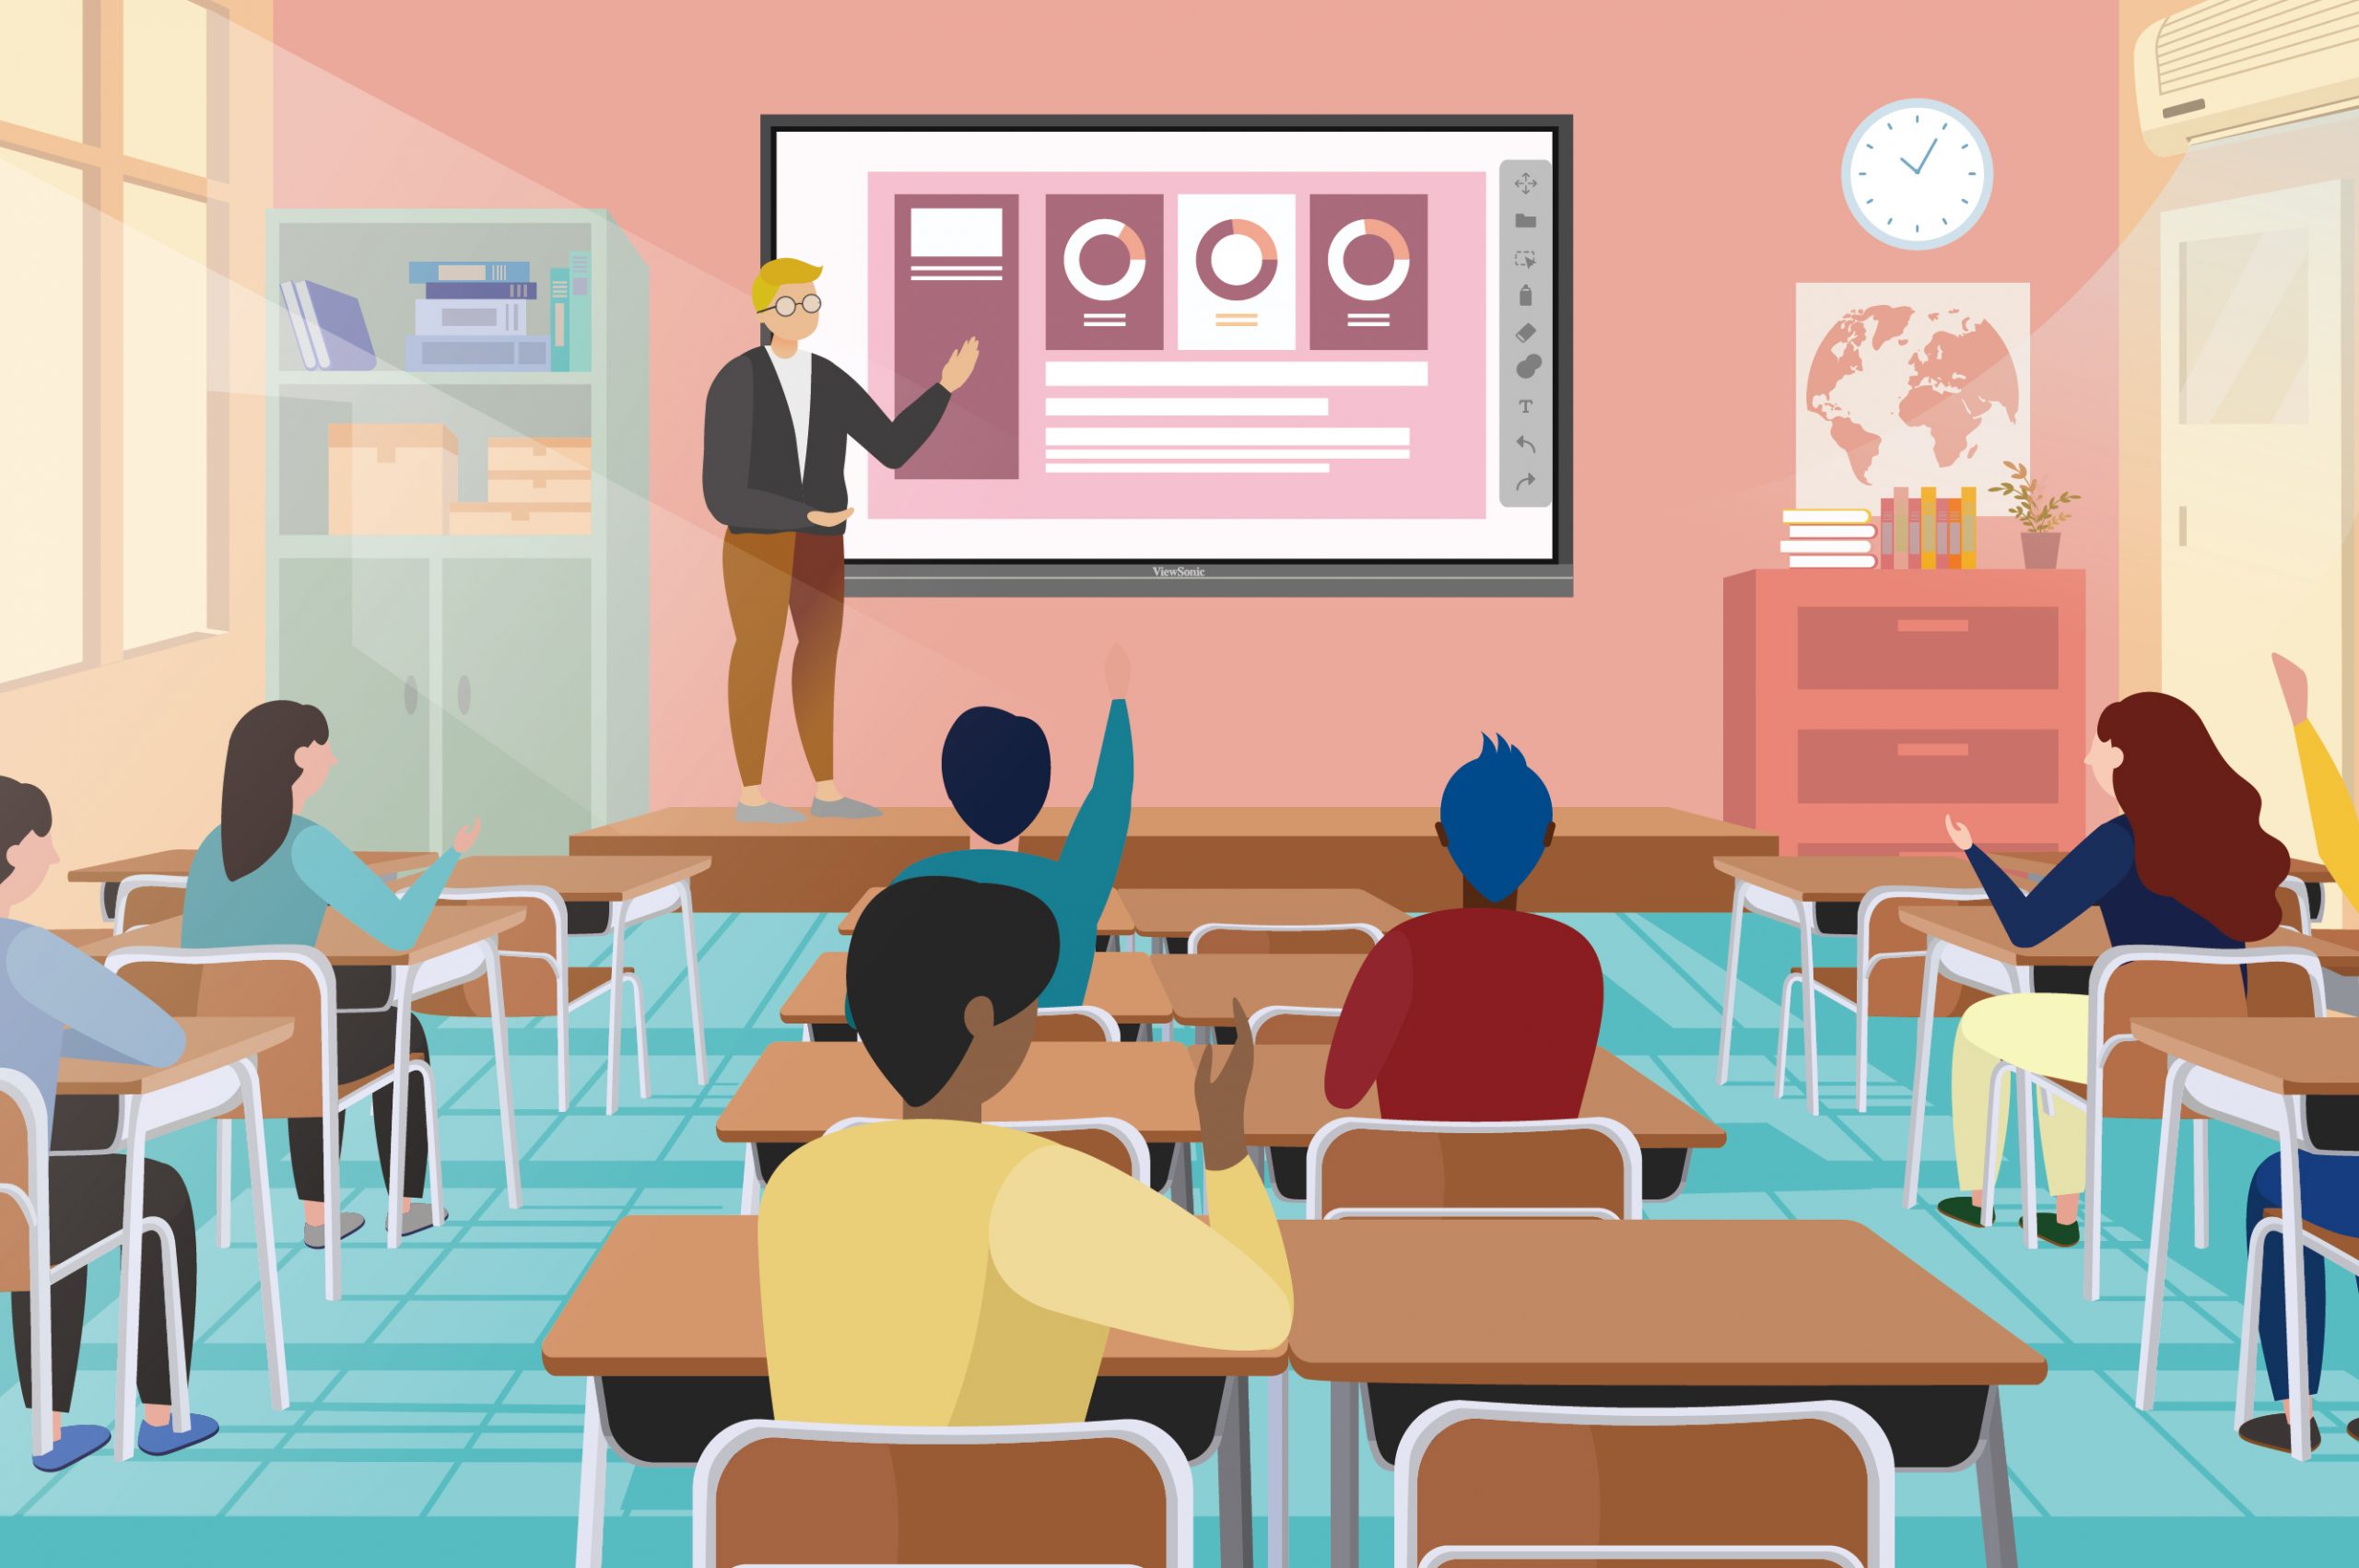 Classroom Design for an Optimized Learning Space - myViewBoard Blog